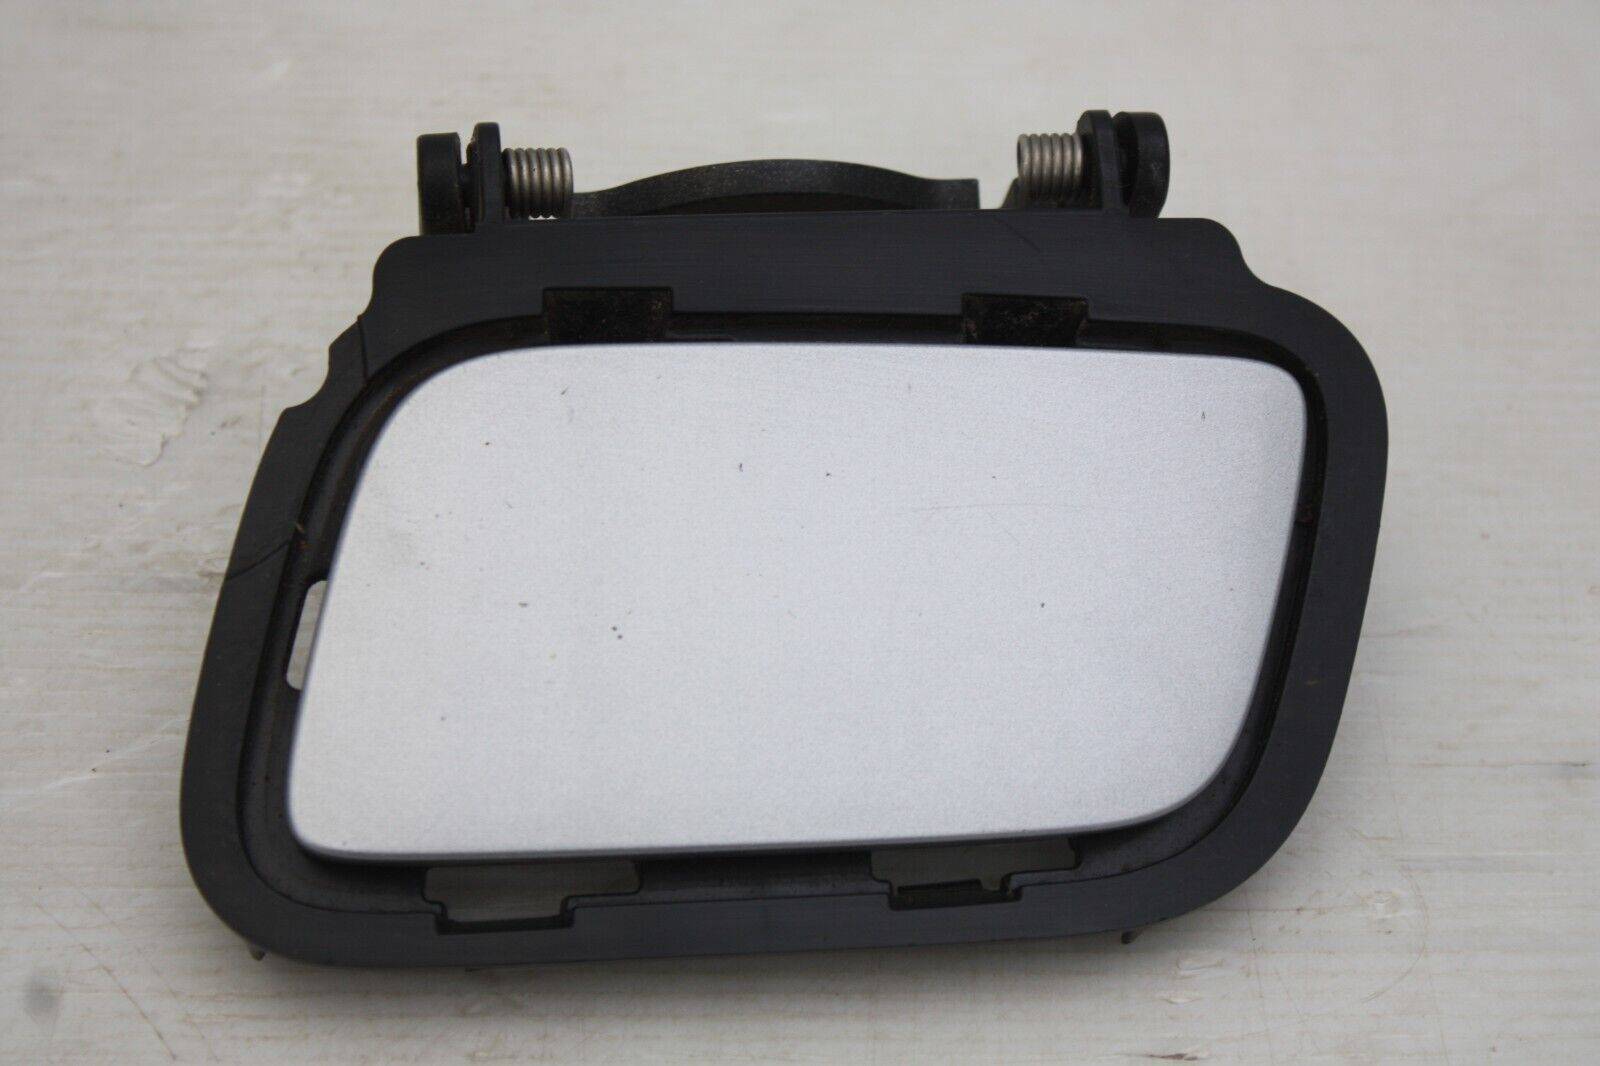 Audi-A4-B8-S-Line-Front-Bumper-Left-Shower-Cover-2012-TO-2015-8K0955275H-Genuine-175660065897